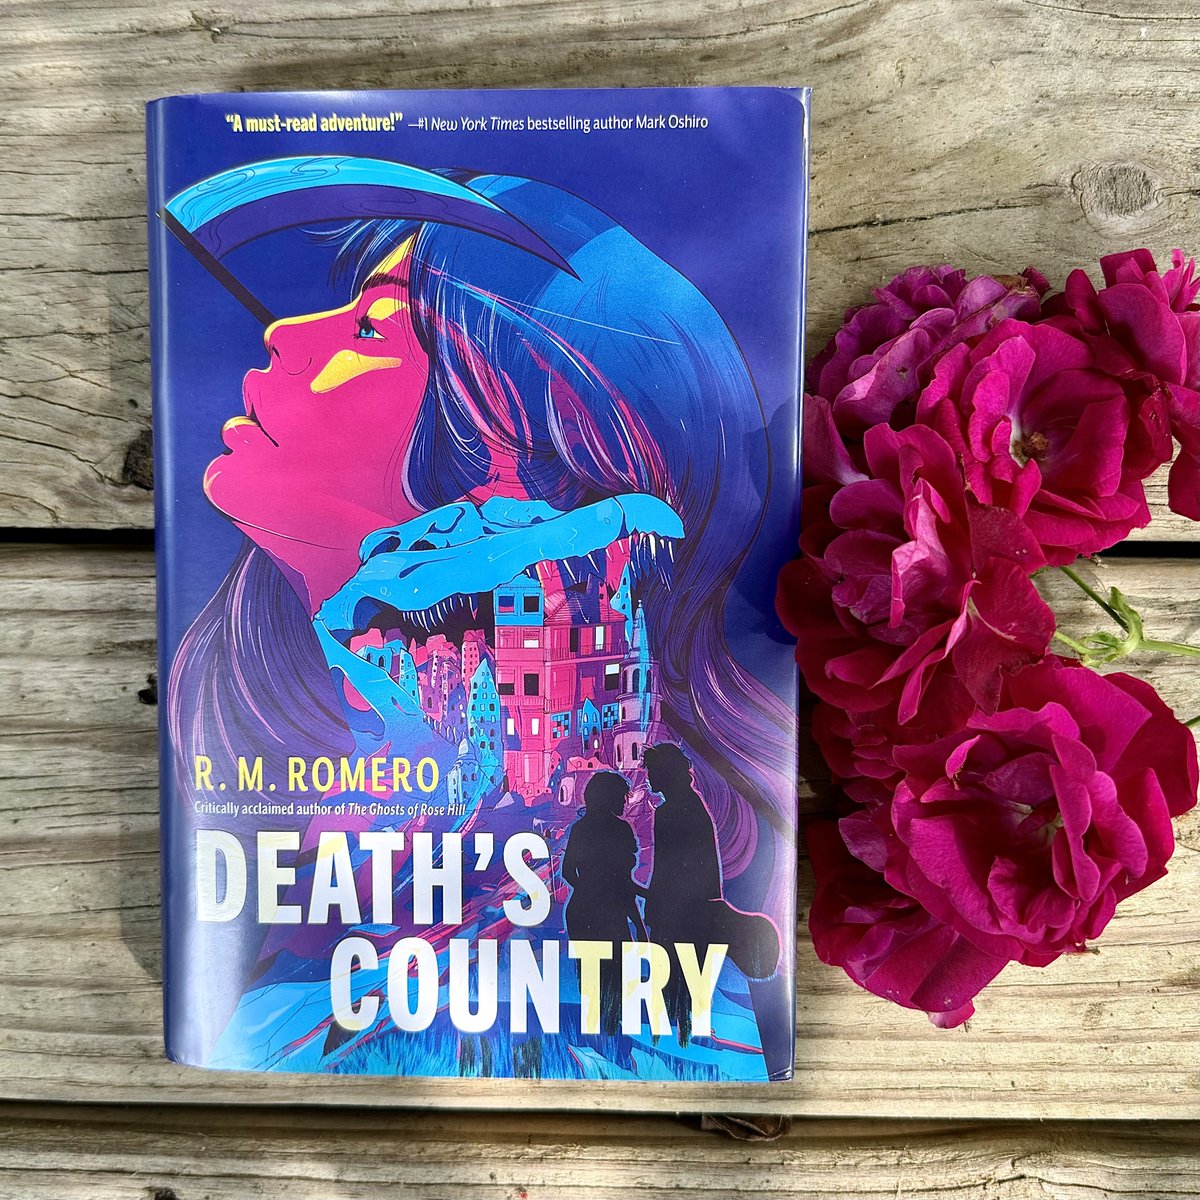 Happy book birthday to DEATH'S COUNTRY! This #yalit masterpiece of magical realism about two teens who journey into the Underworld to retrieve their girlfriend's soul is on shelves today!

ow.ly/aWIf50RxUQp

#bookbirthday